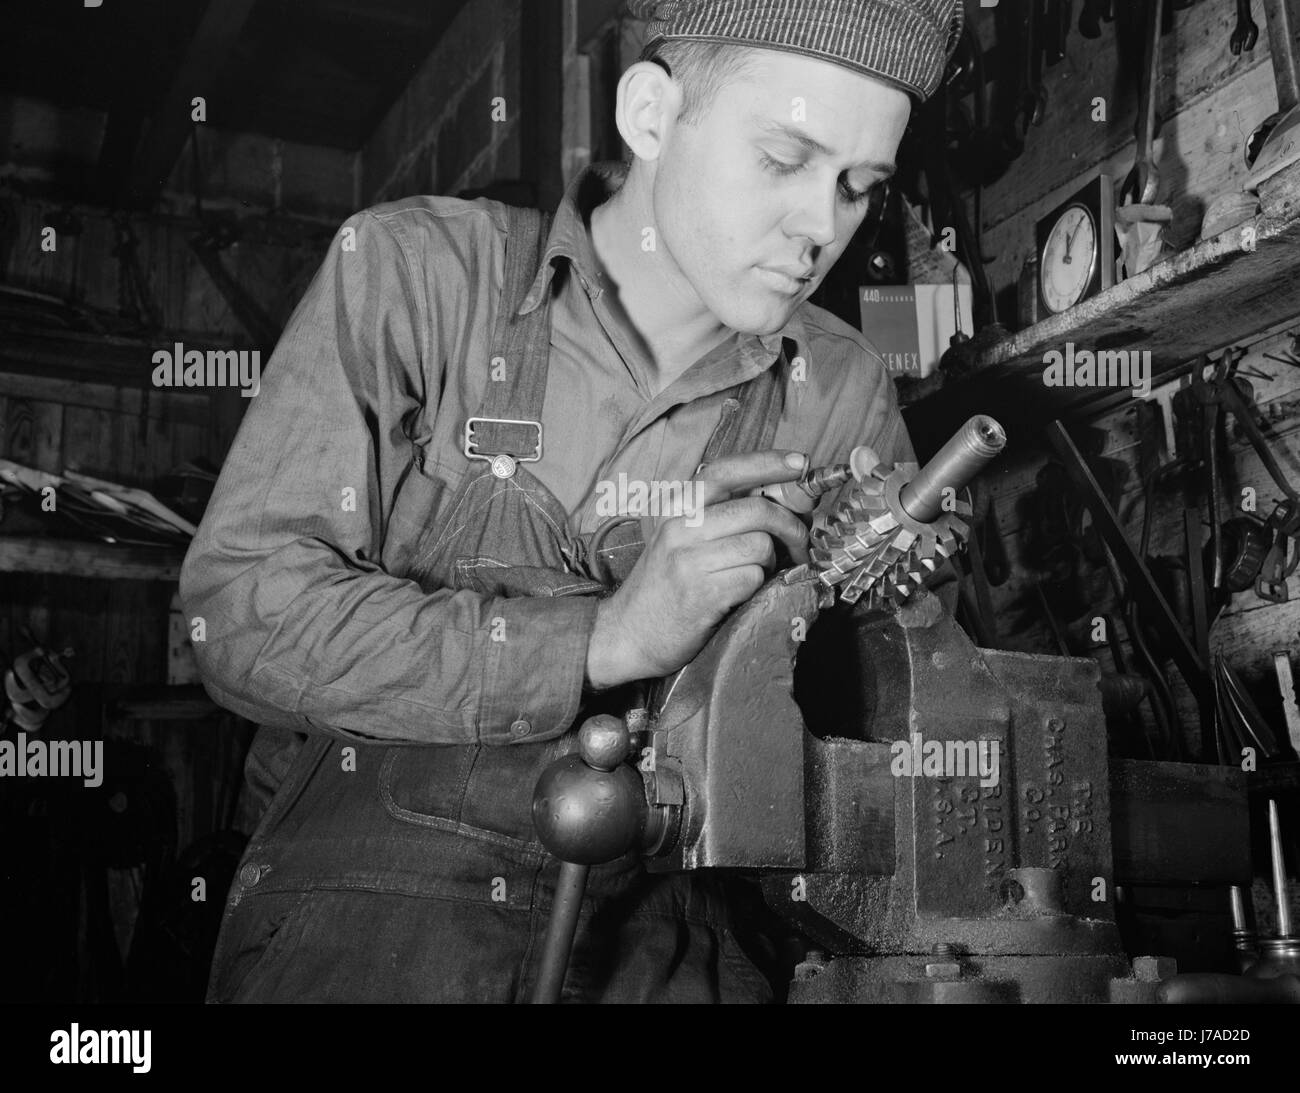 Man working in a small machine shop for war production, circa 1942. Stock Photo